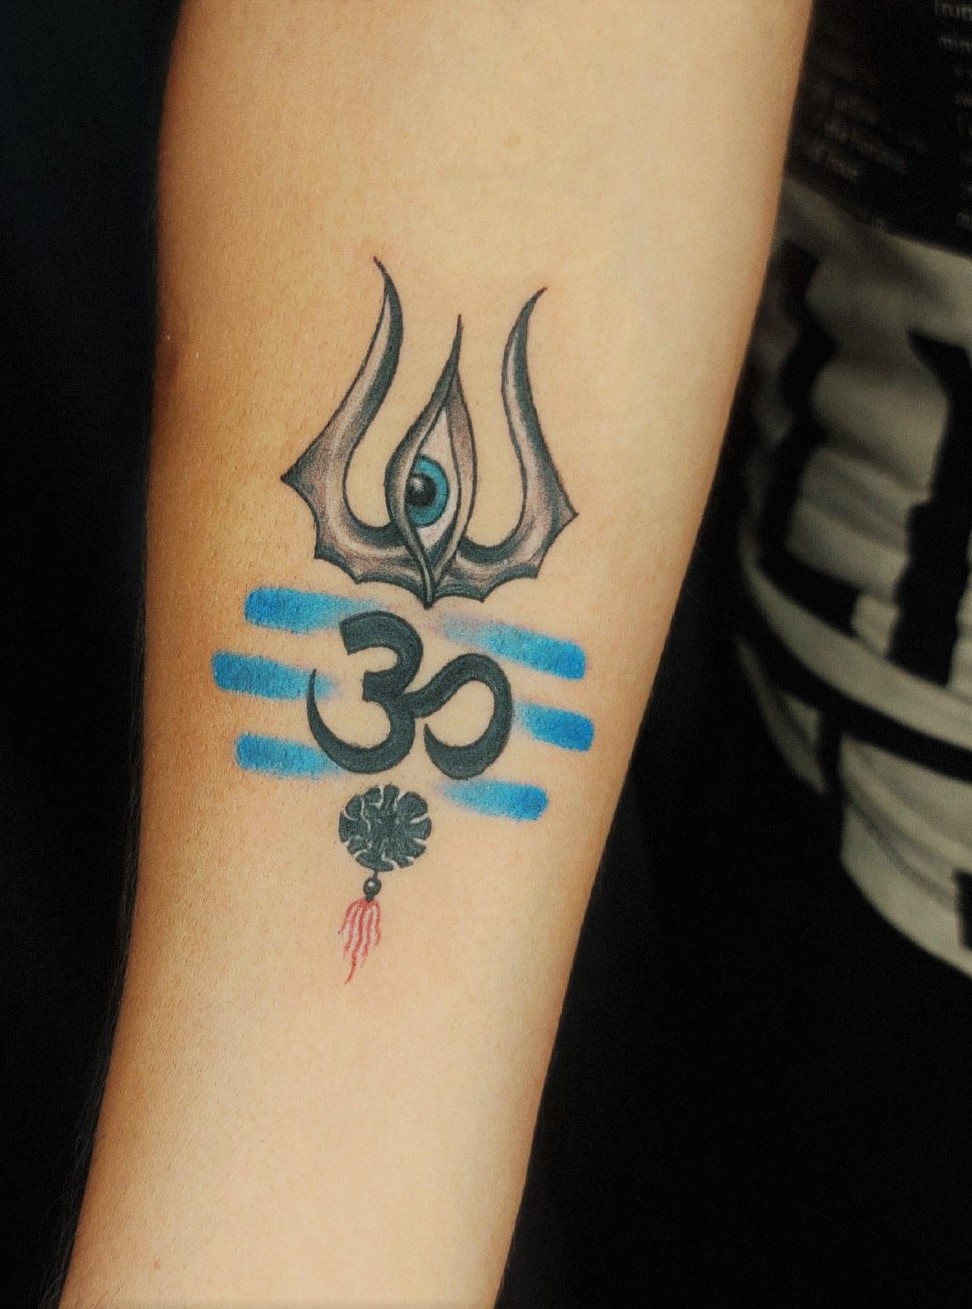 Discover Om Symbol With Trishul Tattoo on Forearm  Black Poison Tattoos